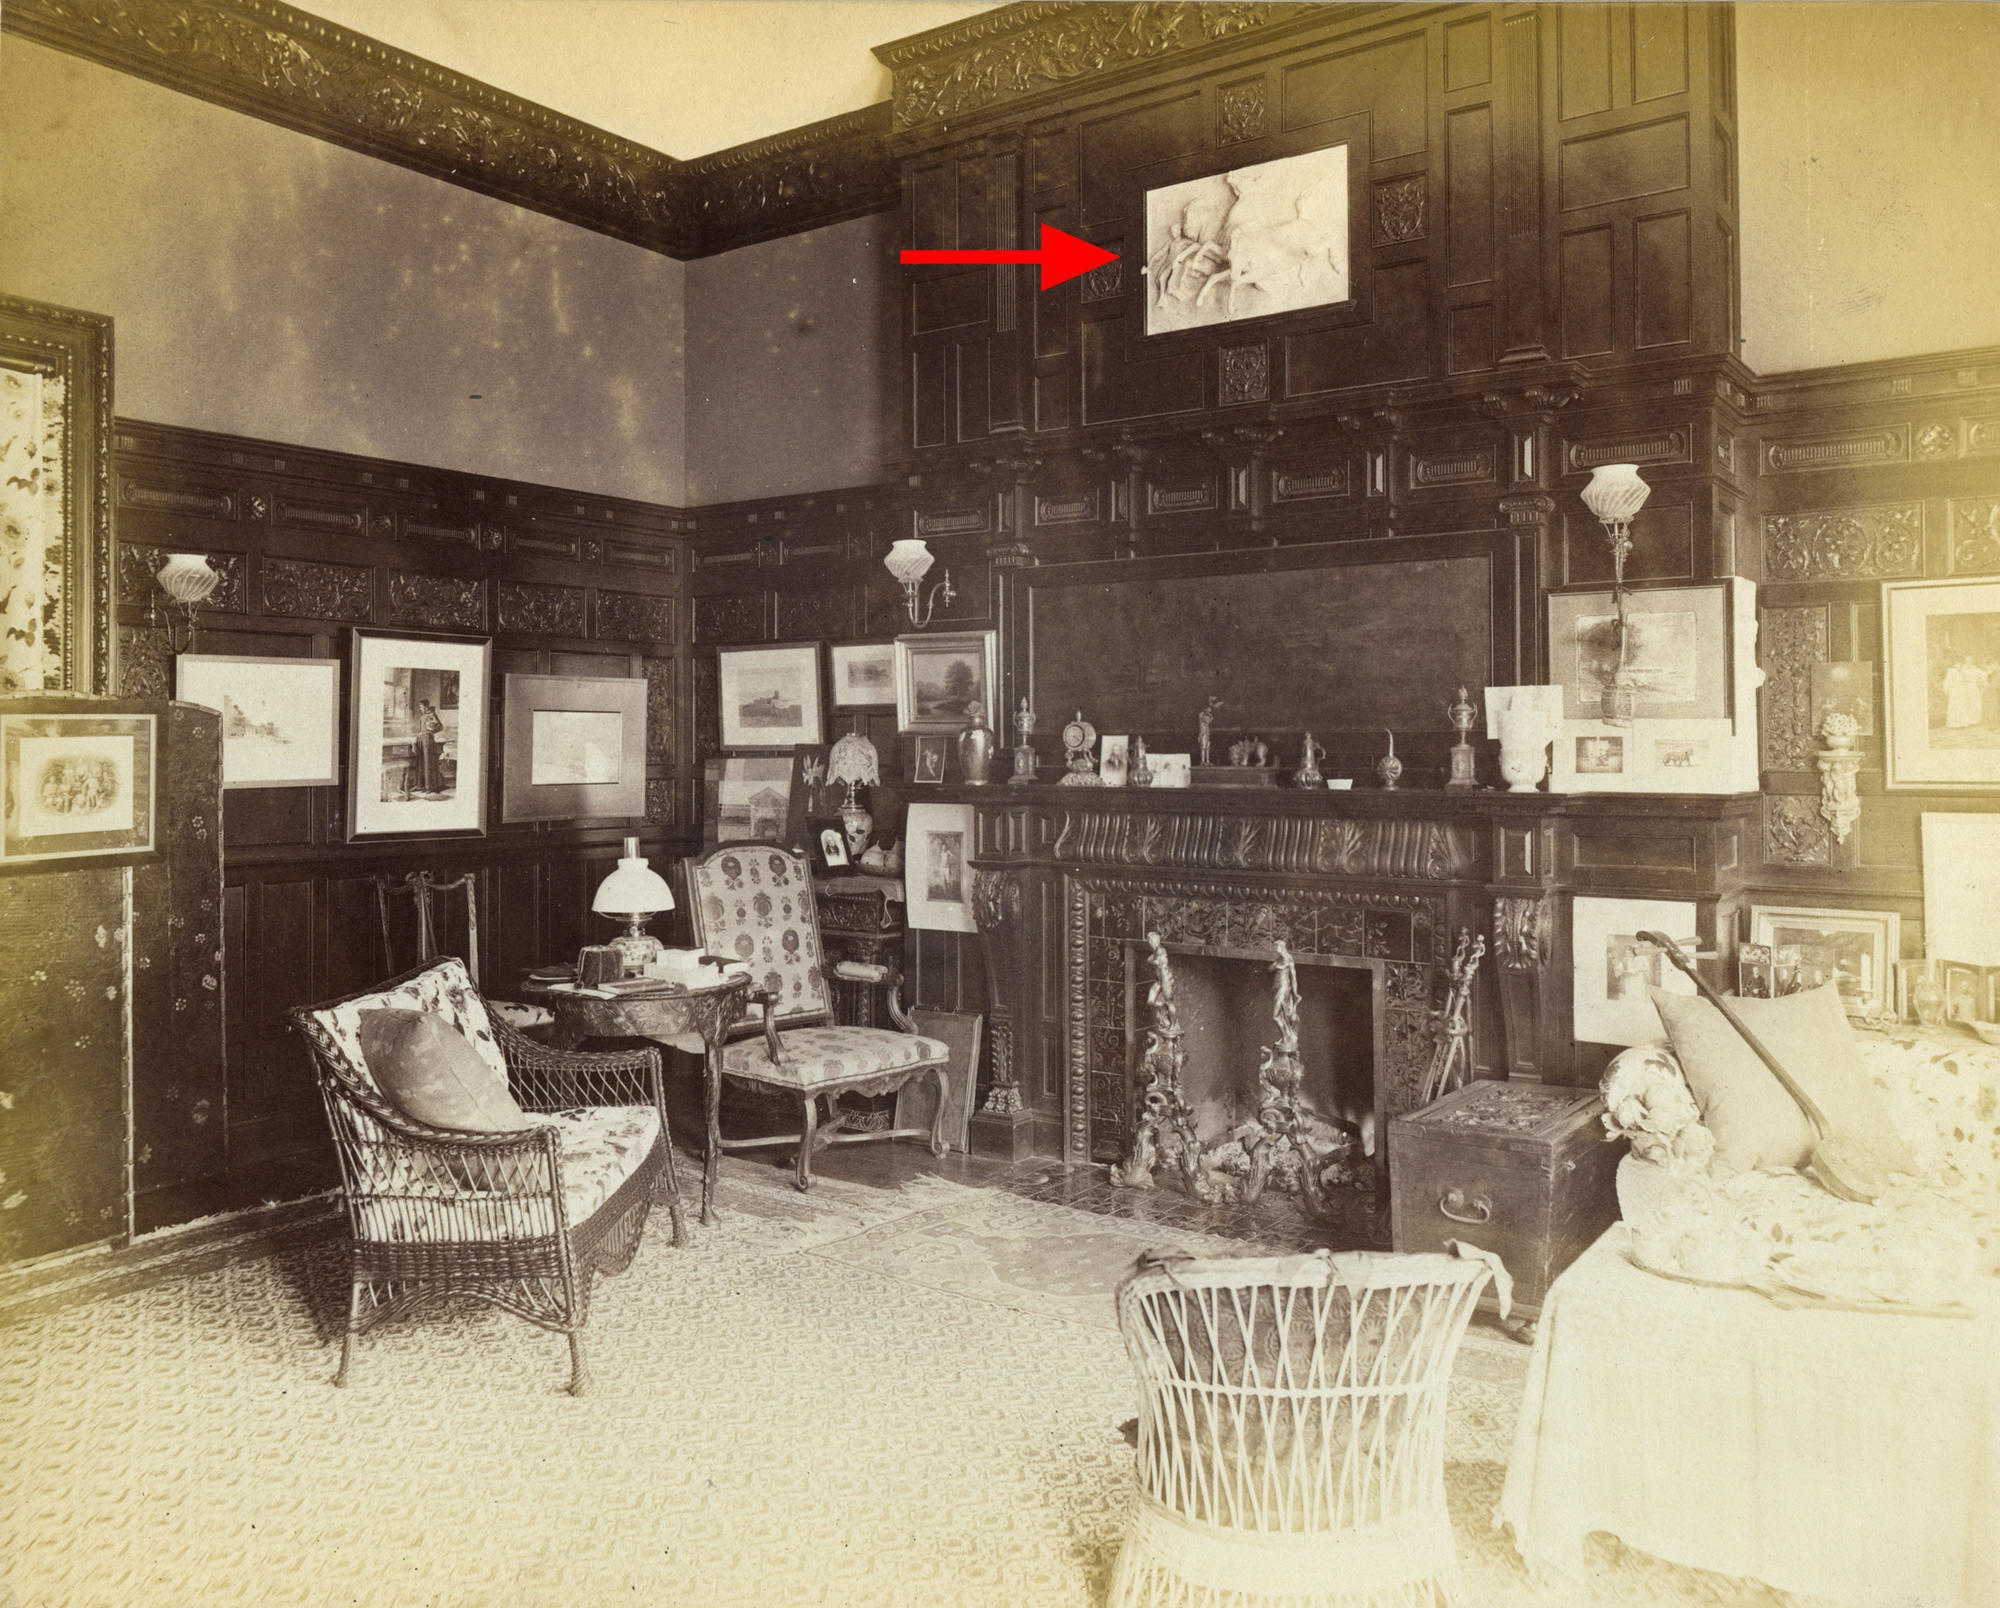 A black and white photograph of a dark wood paneled room, with a red arrow indicating William Morris Hunt’s plaster cast of horses over the mantel